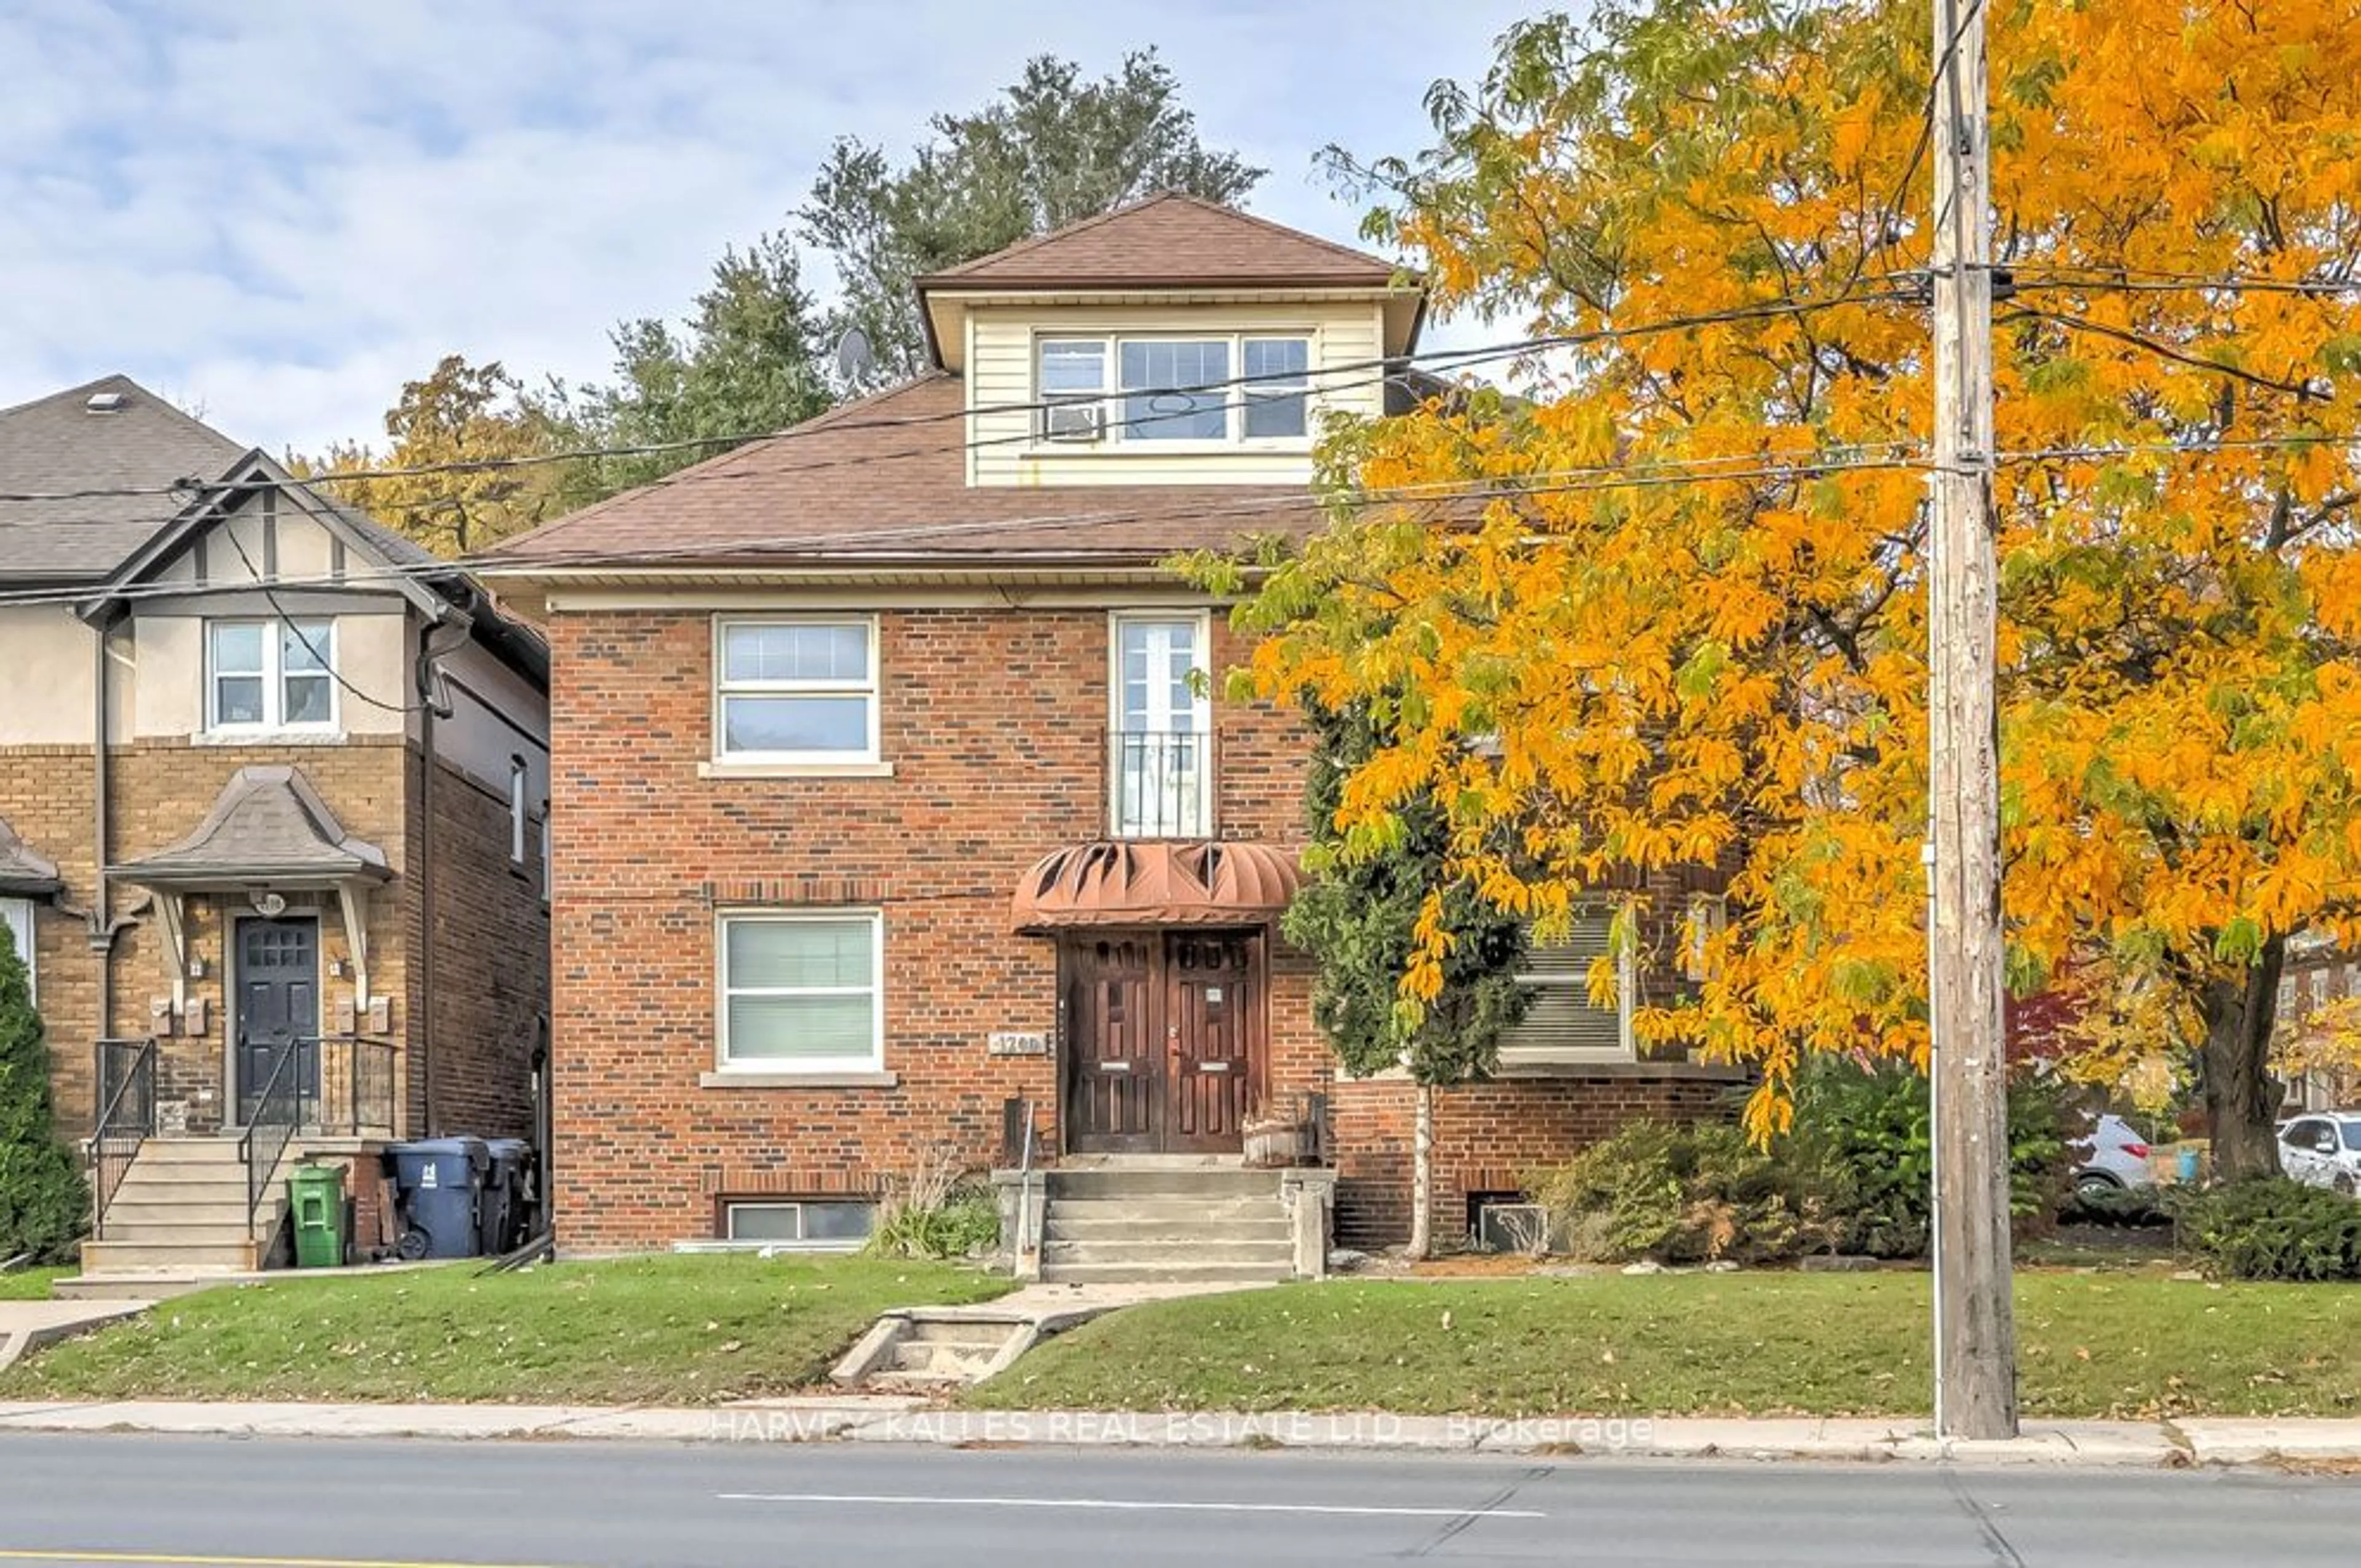 Home with brick exterior material for 1200 Avenue Rd, Toronto Ontario M5N 2G1